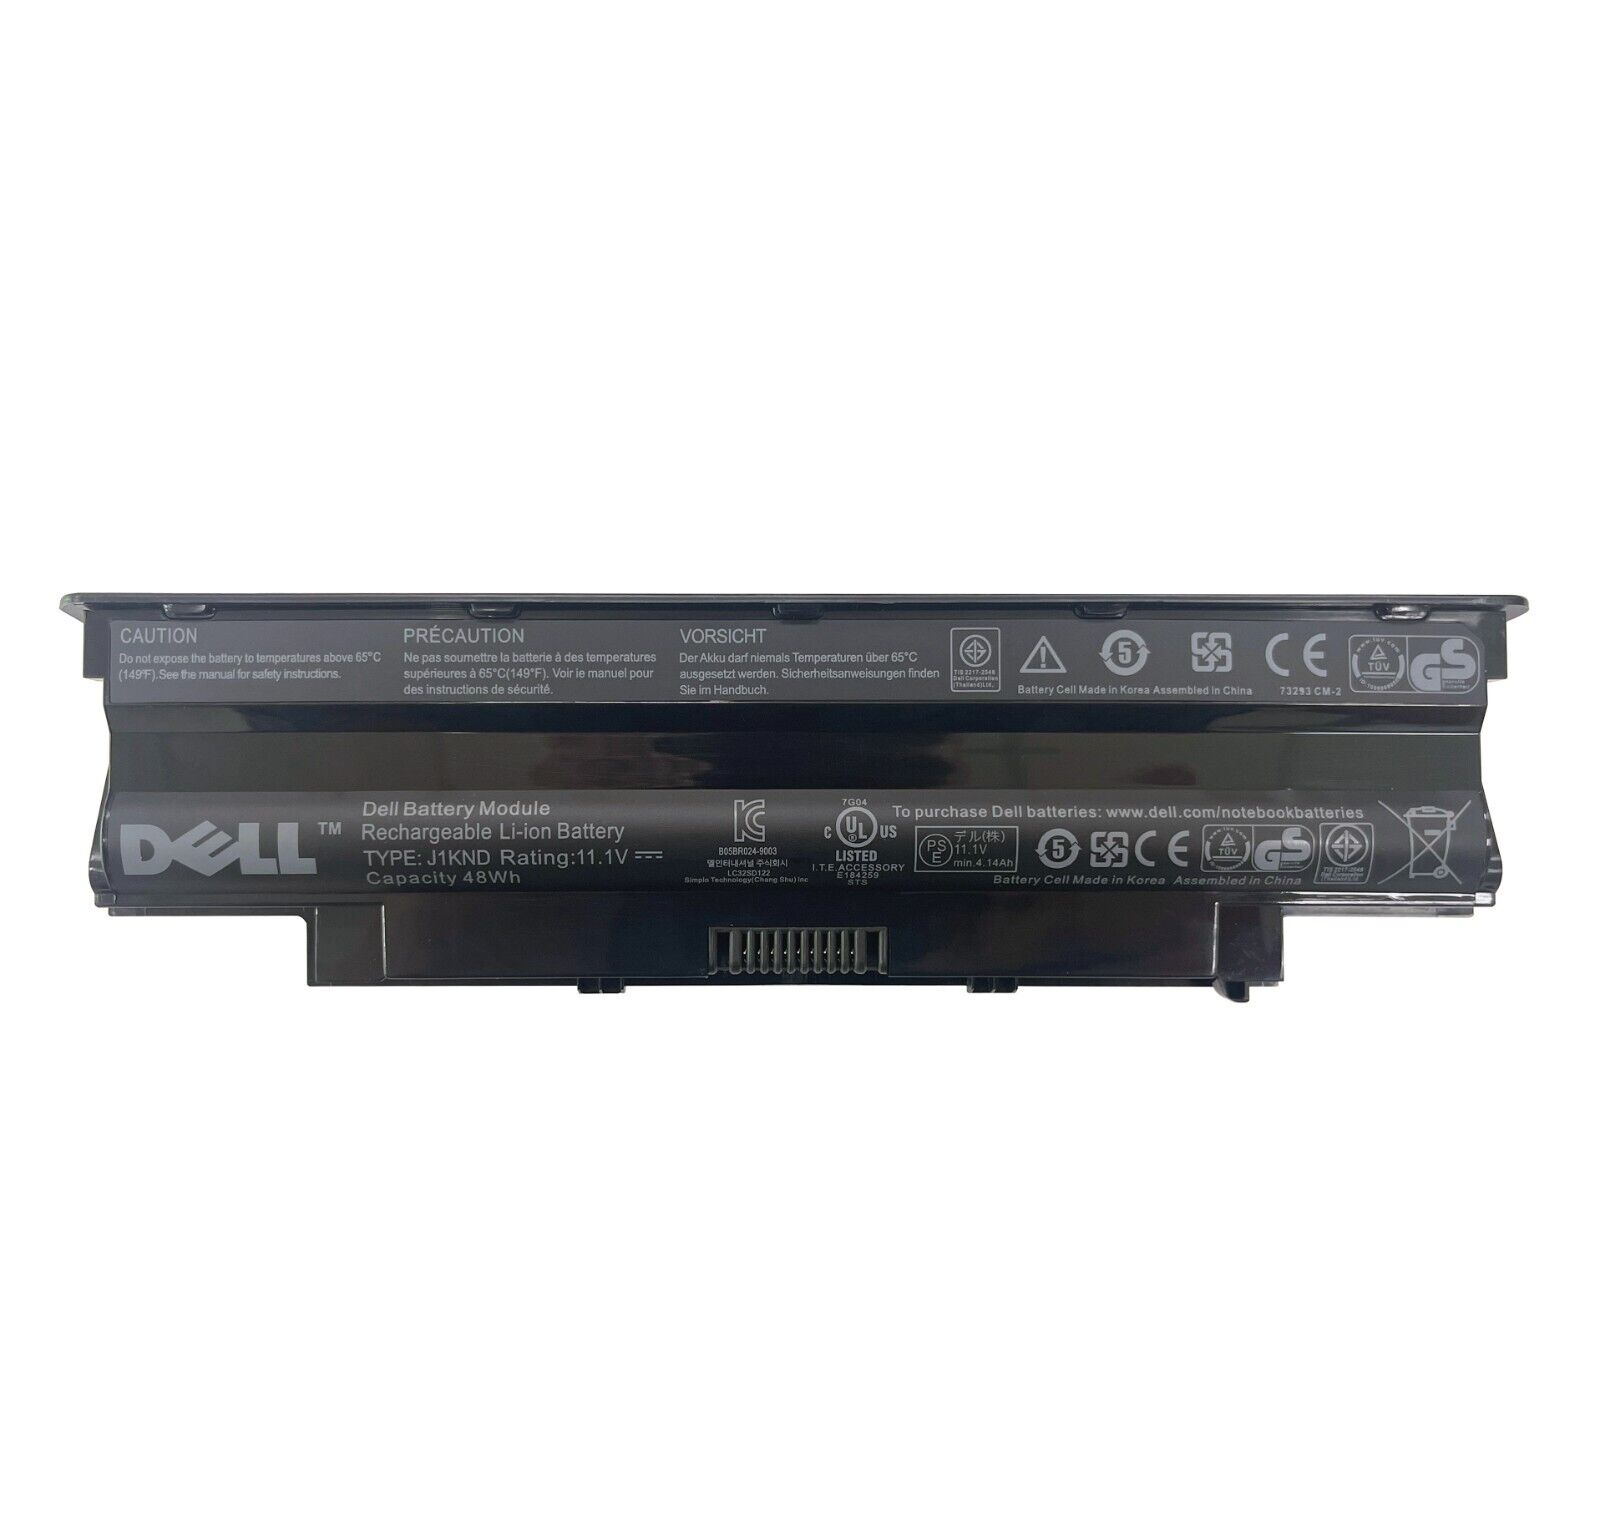 Genuine J1KND Battery For Dell Inspiron 3520 3420 M5030 N5110 N5050 N7110 N4010